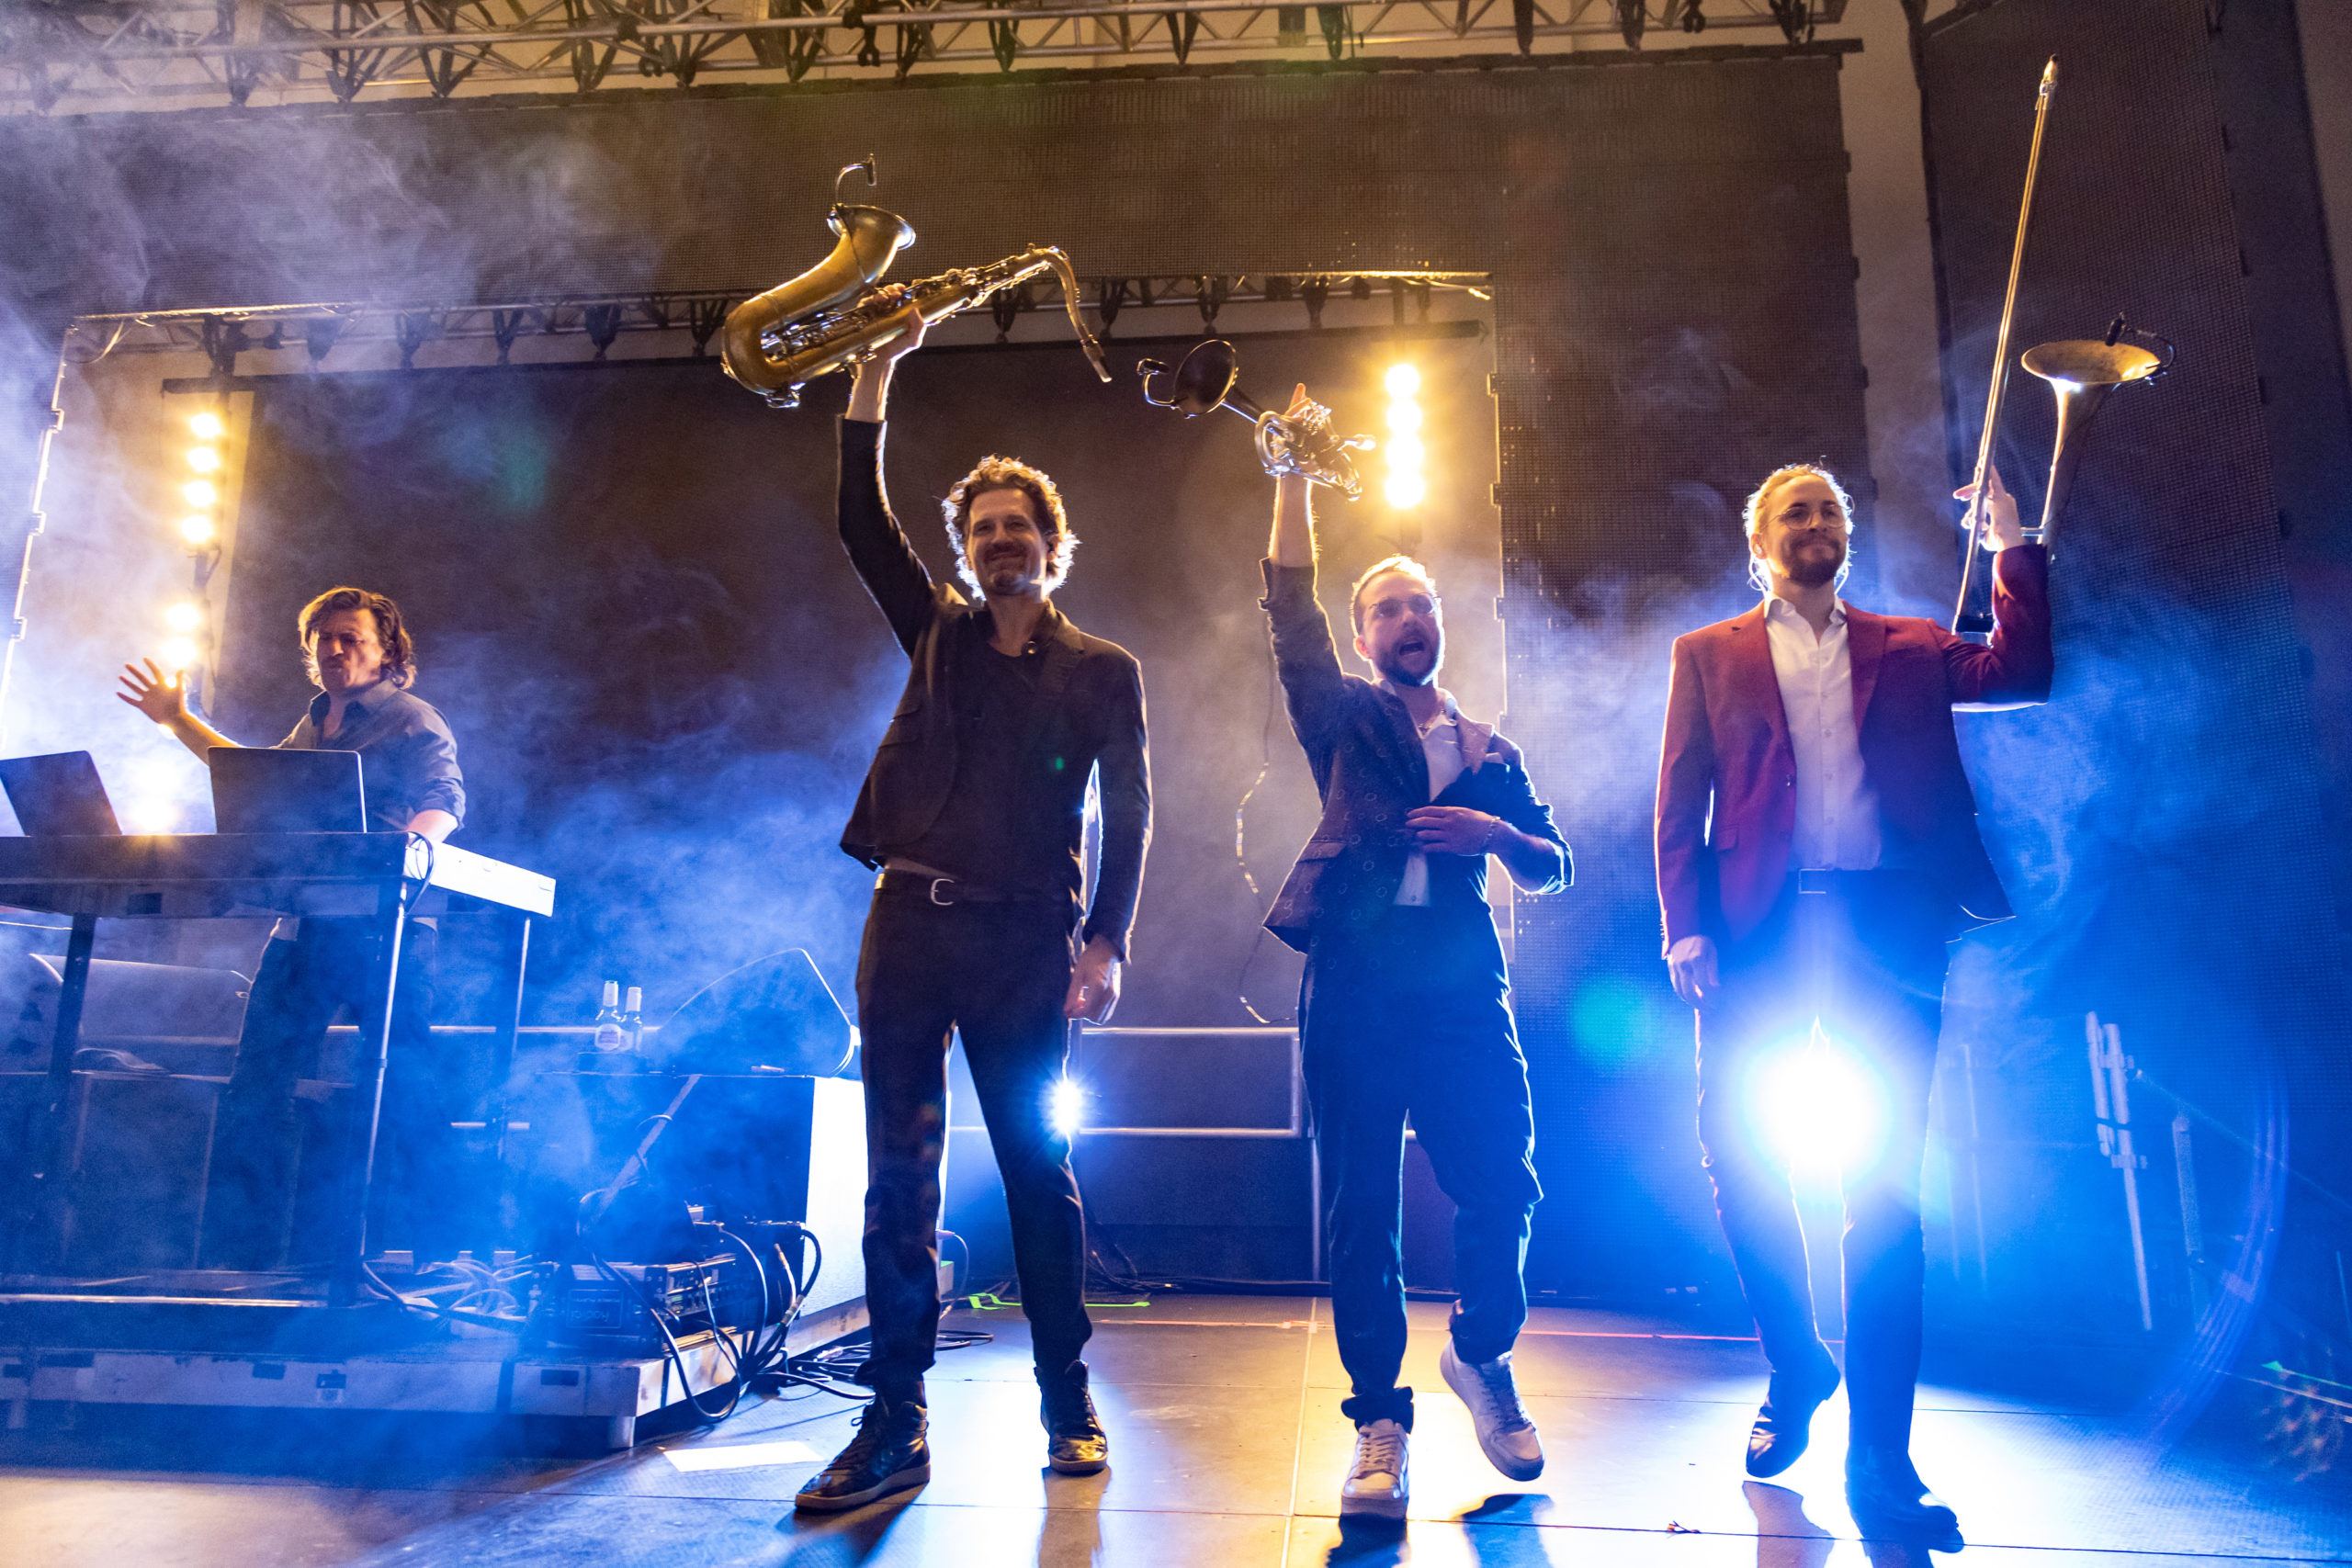 Parov Stelar takes to the stage with his brass band backlit and waving their instruments